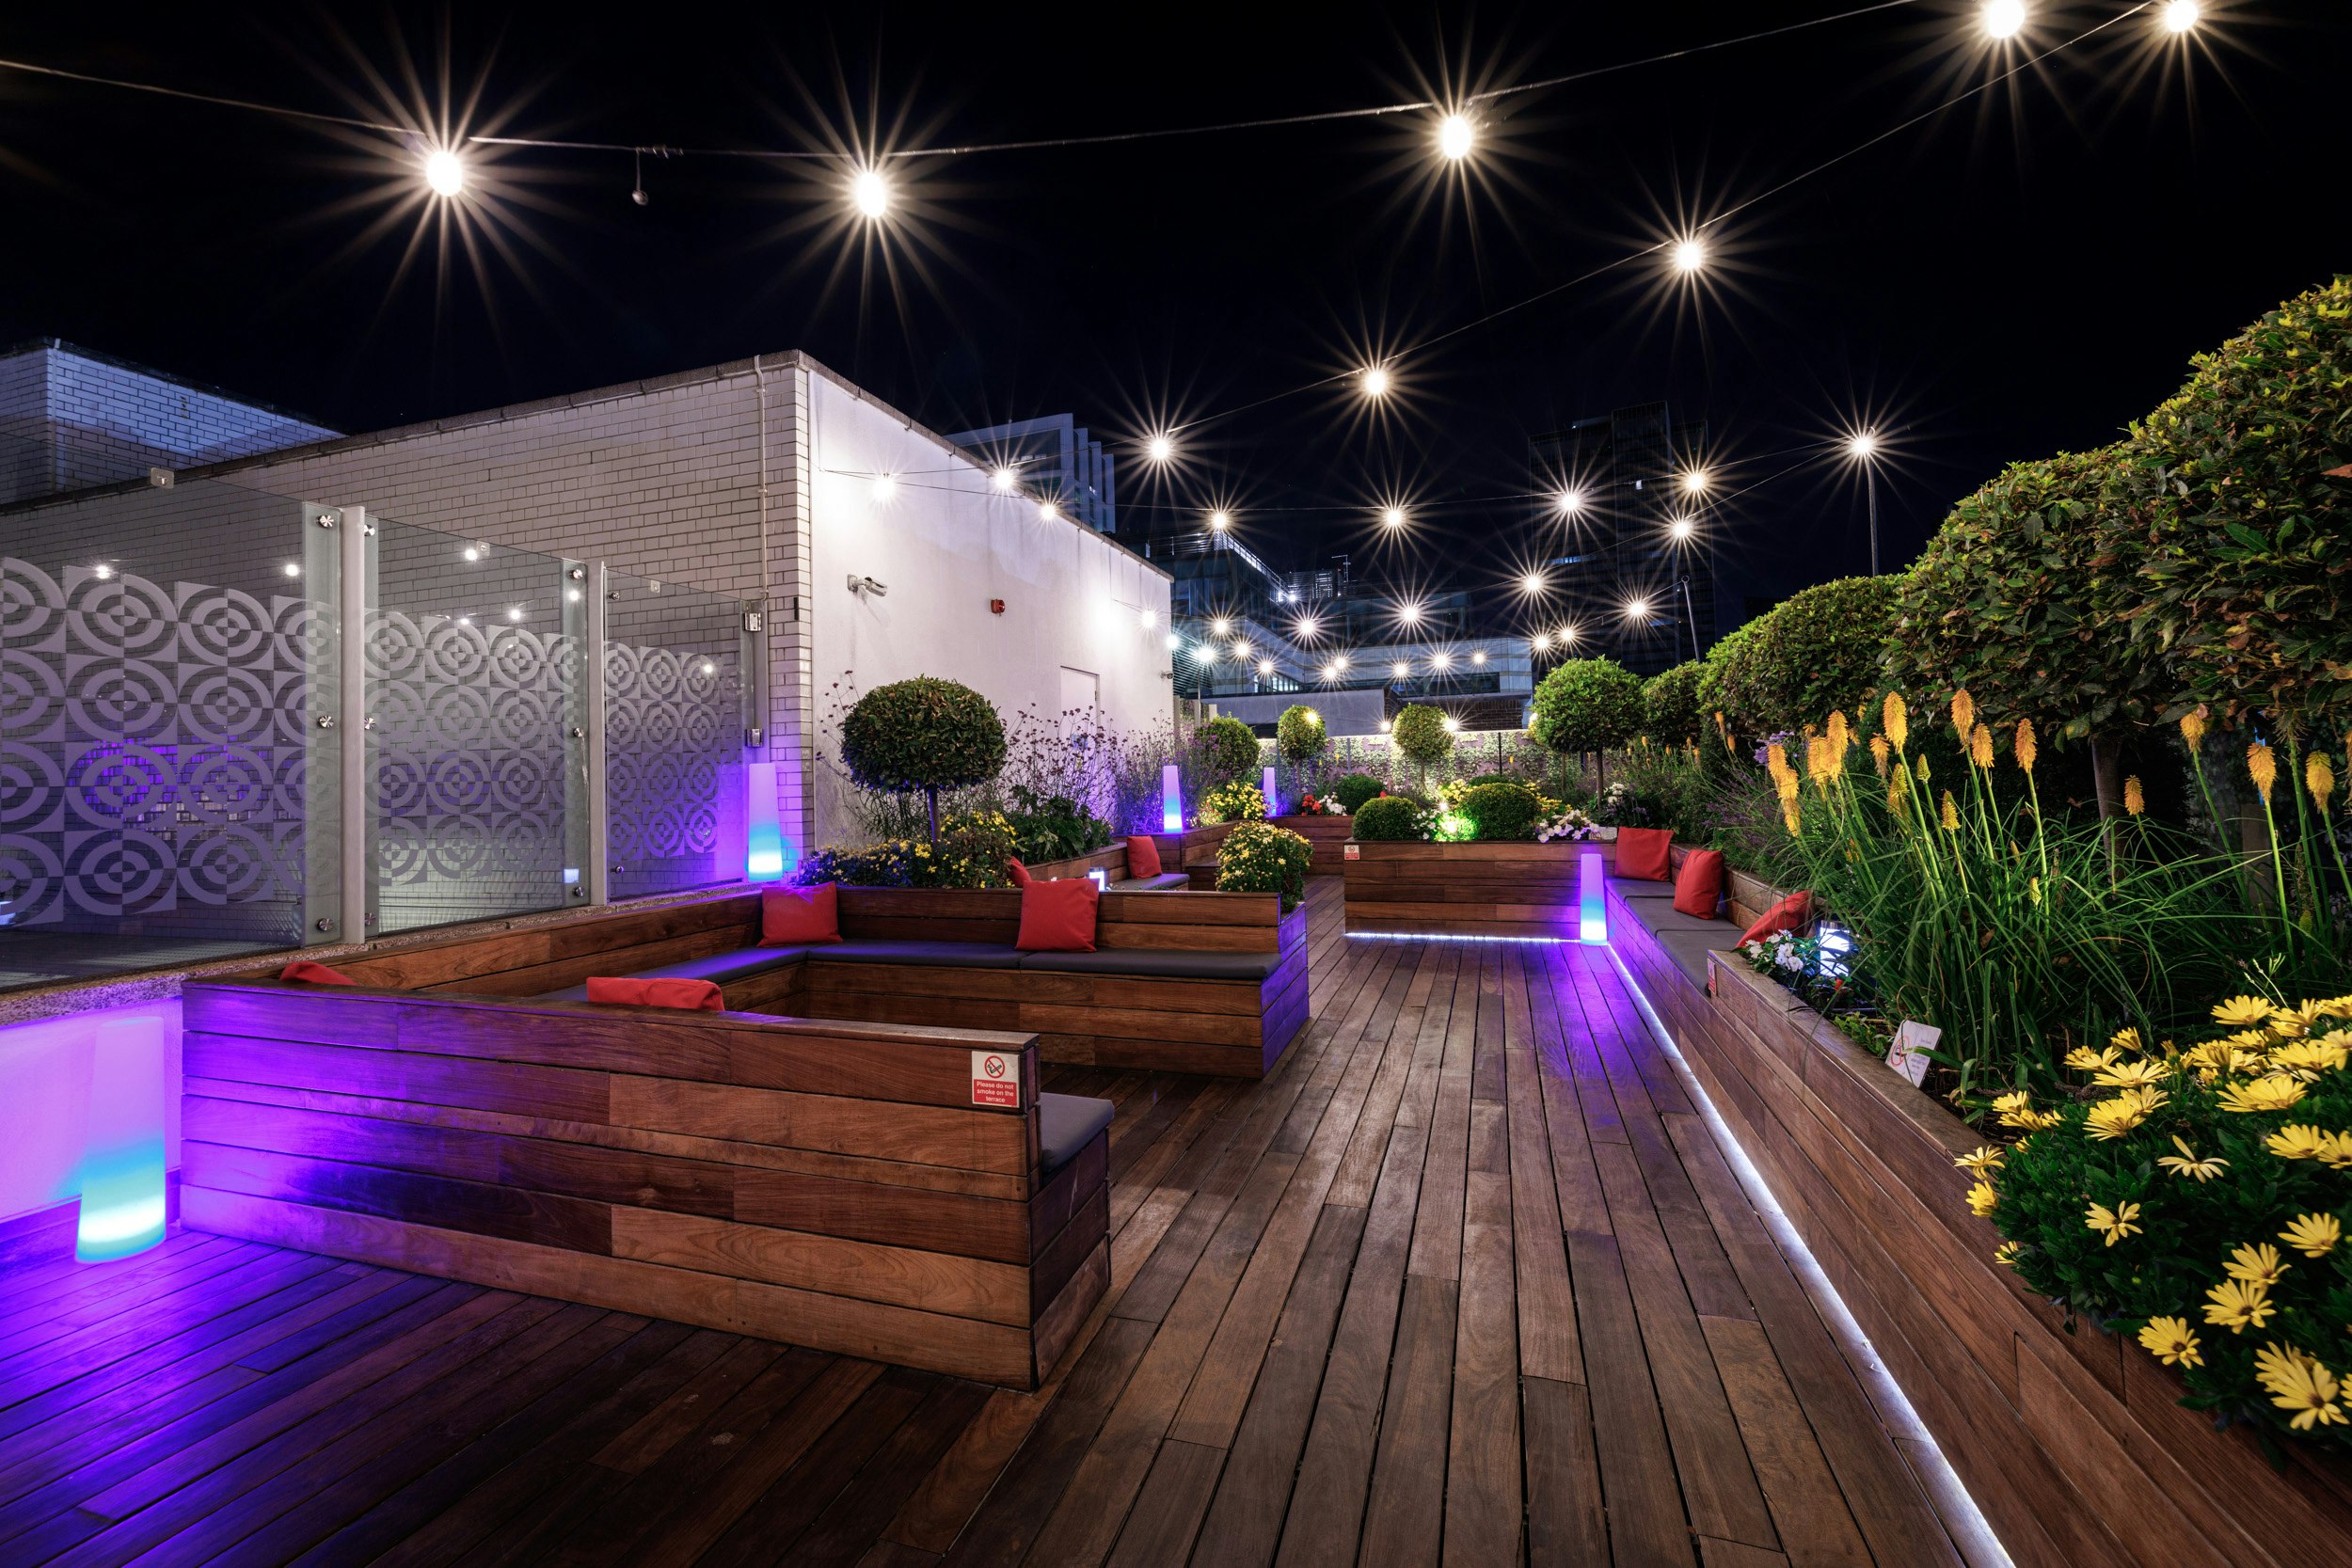 The Rooftop Terrace